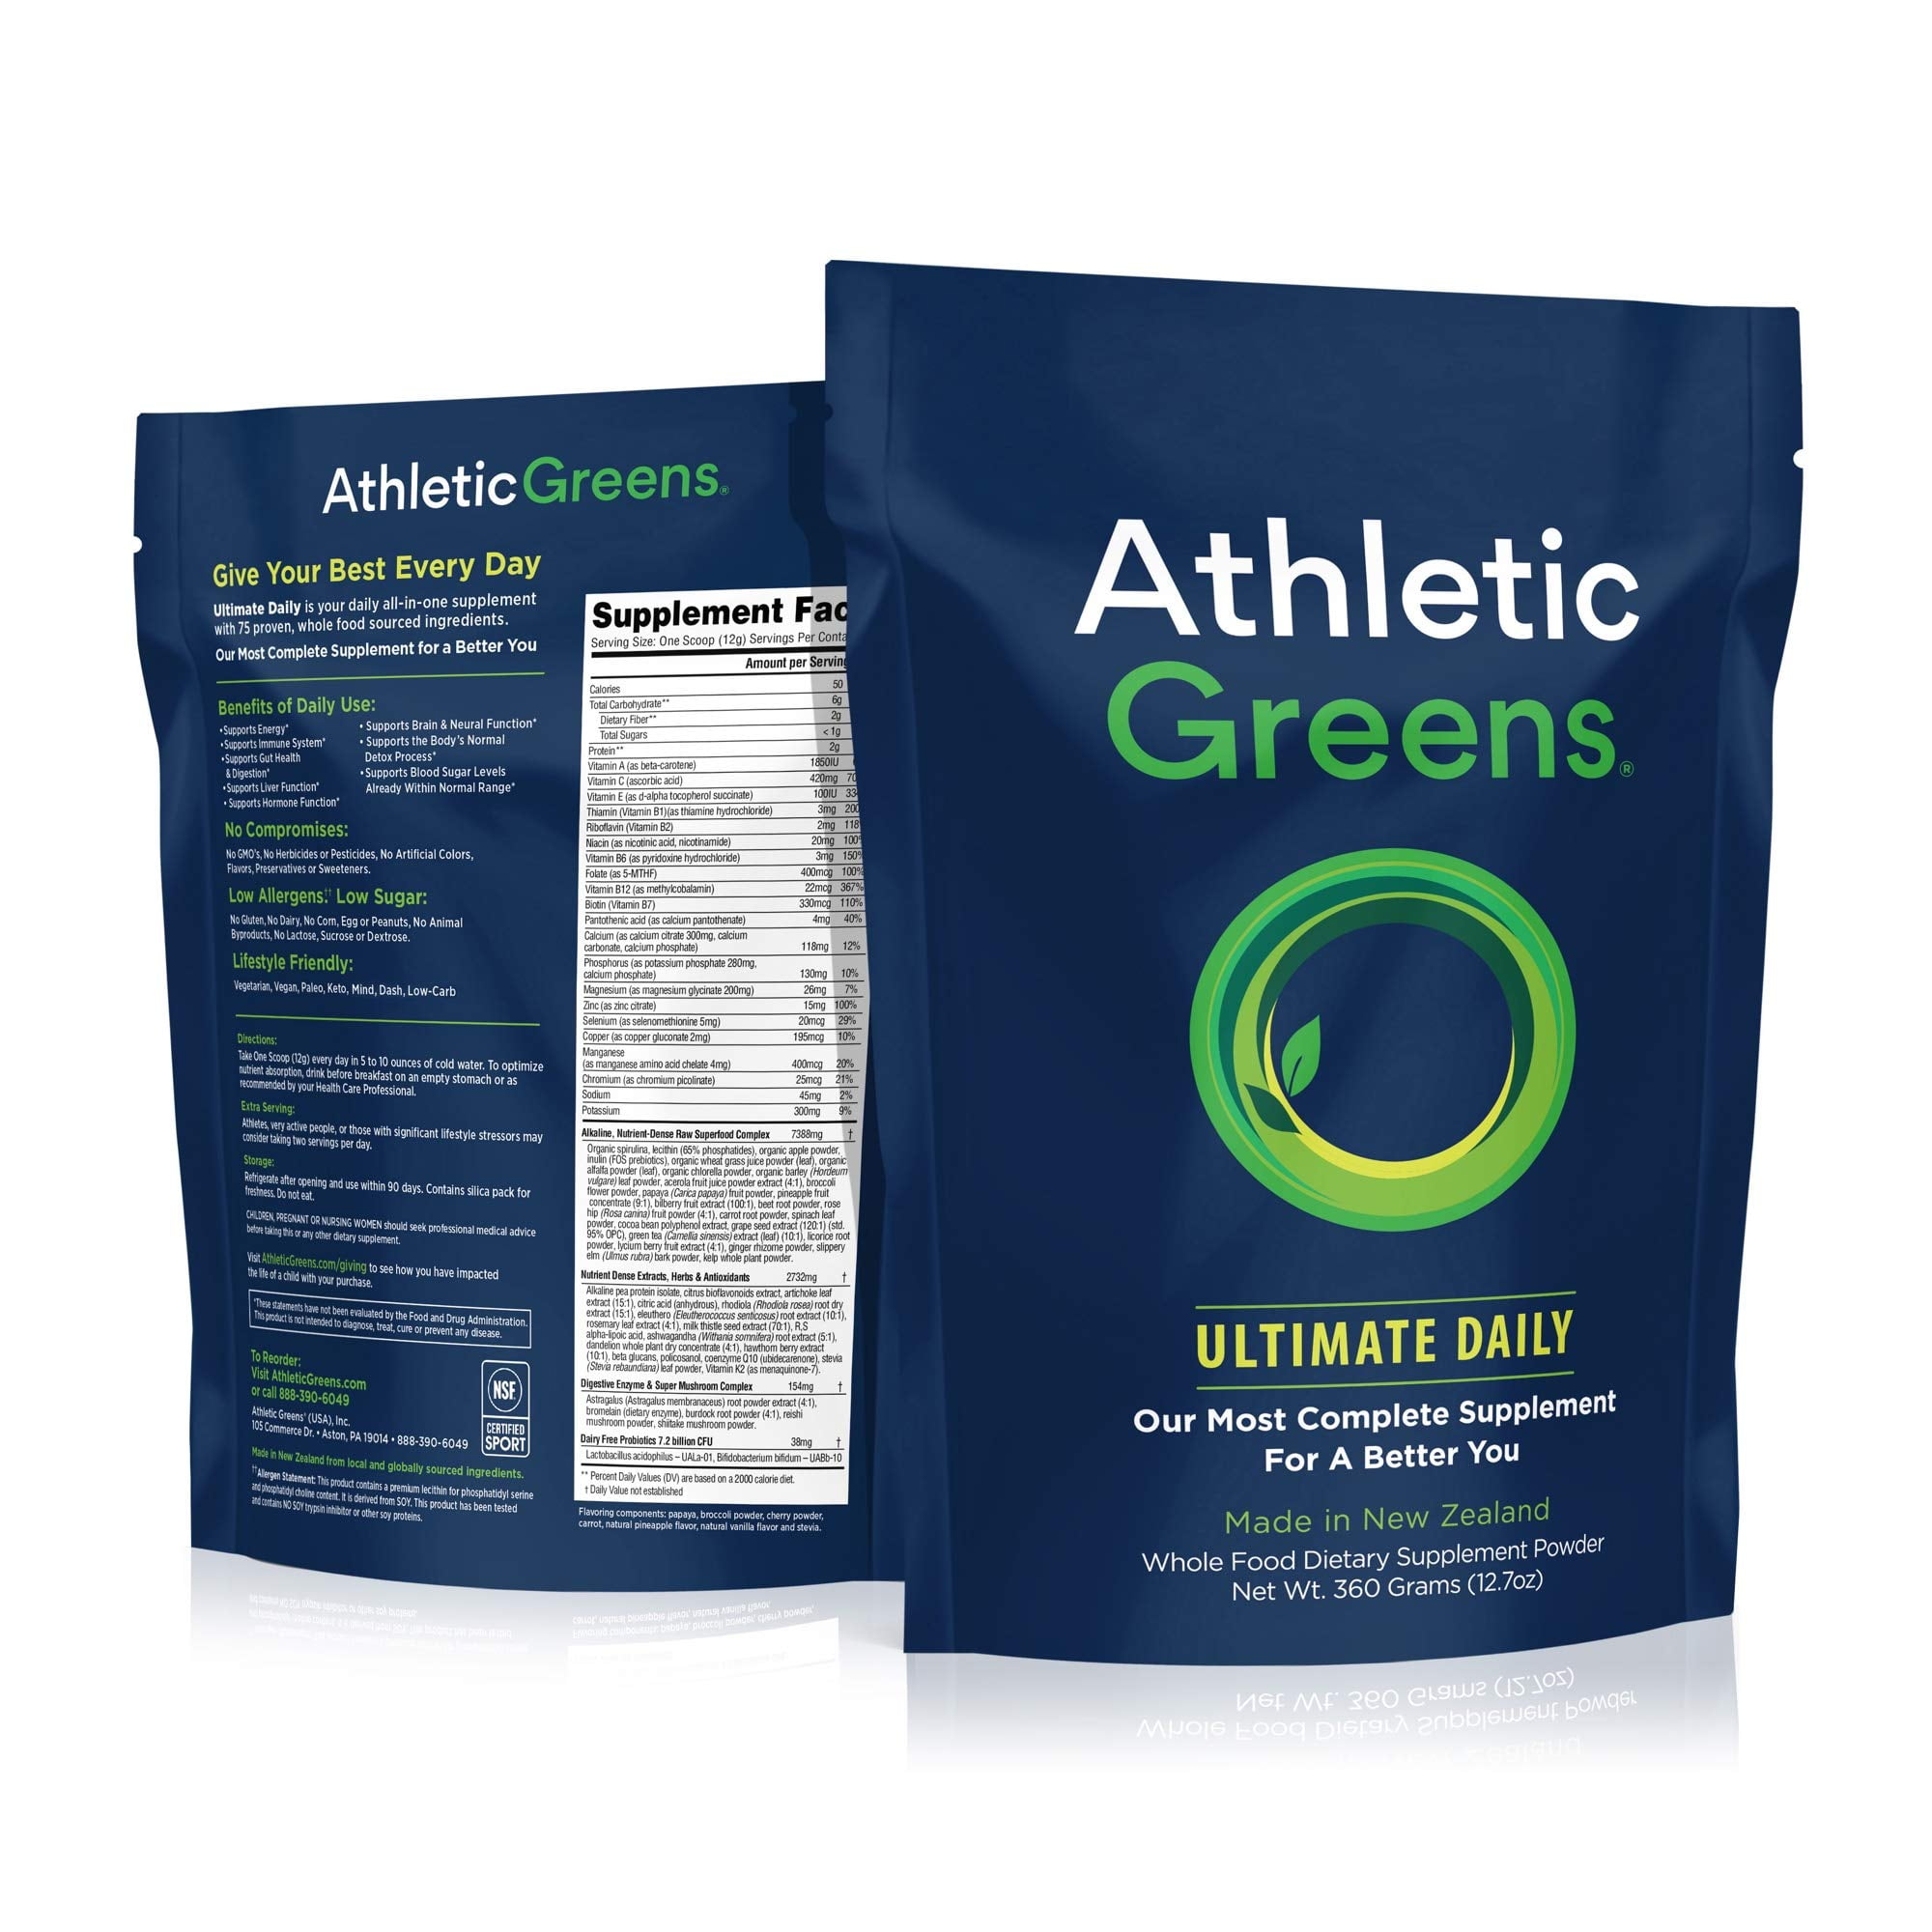 AG1 by Athletic Greens has 75 vitamins, minerals, whole-food